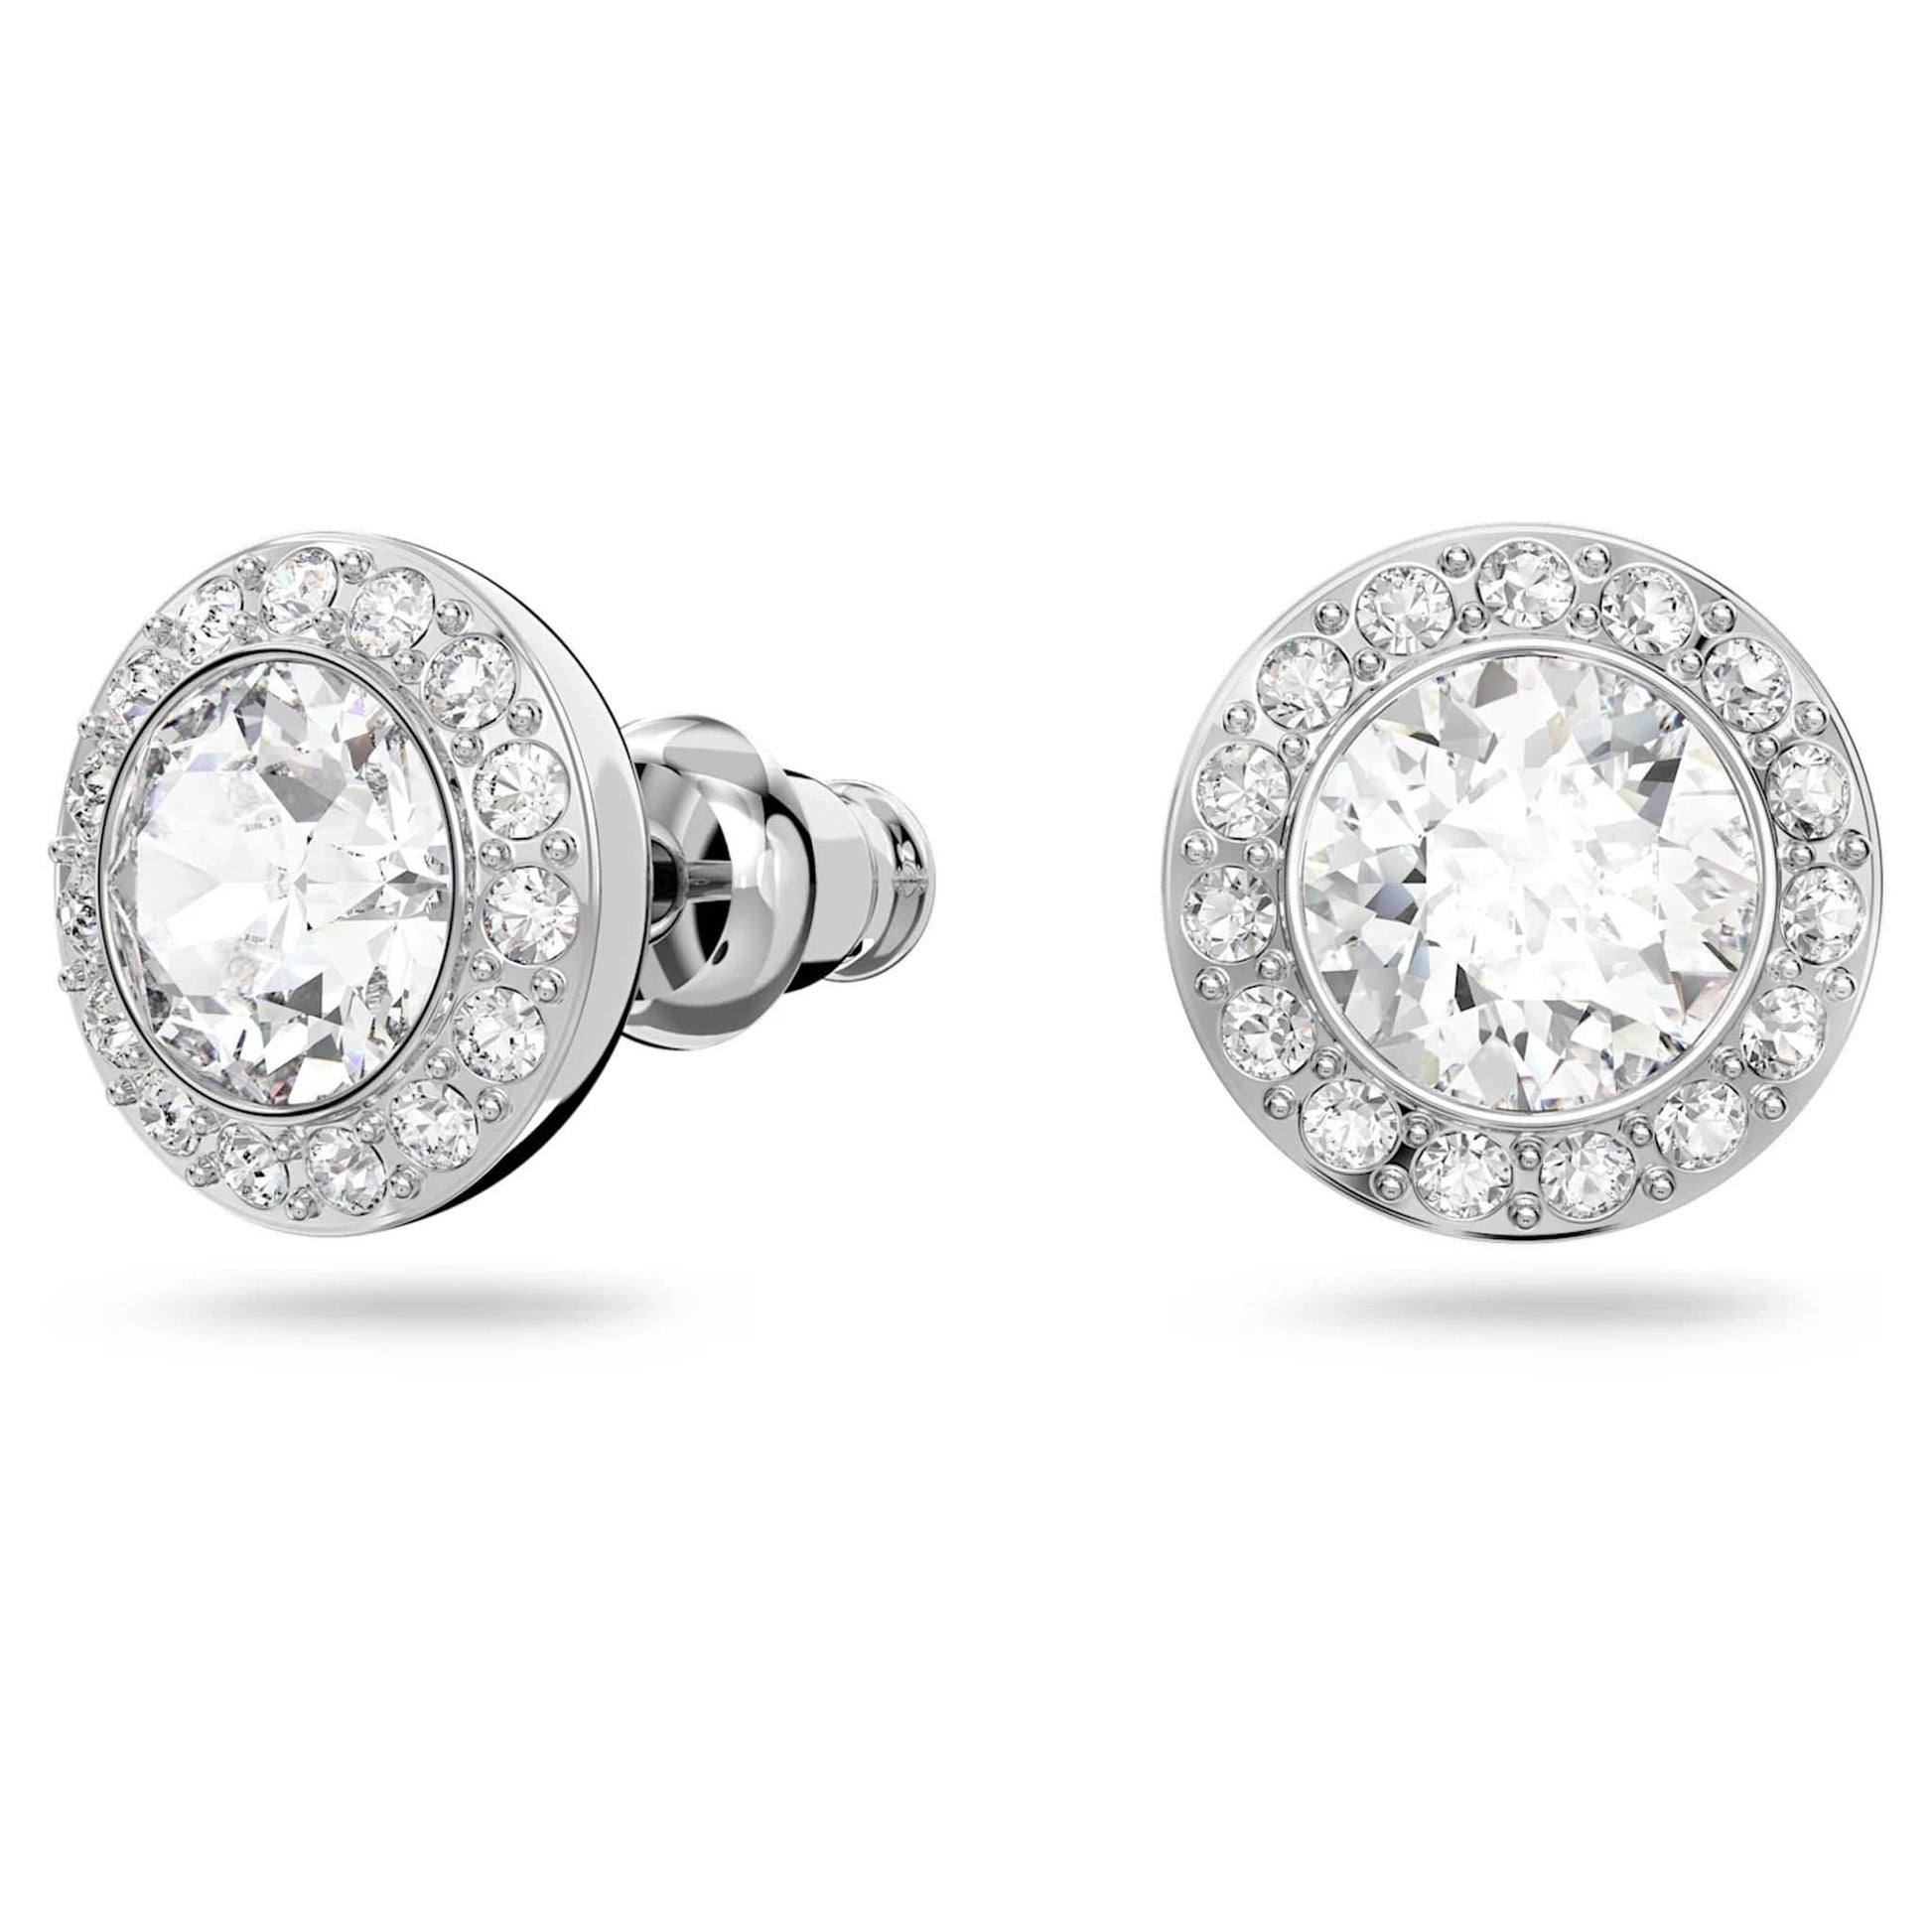 Angelic stud earrings - Cosmos Boutique New Jersey